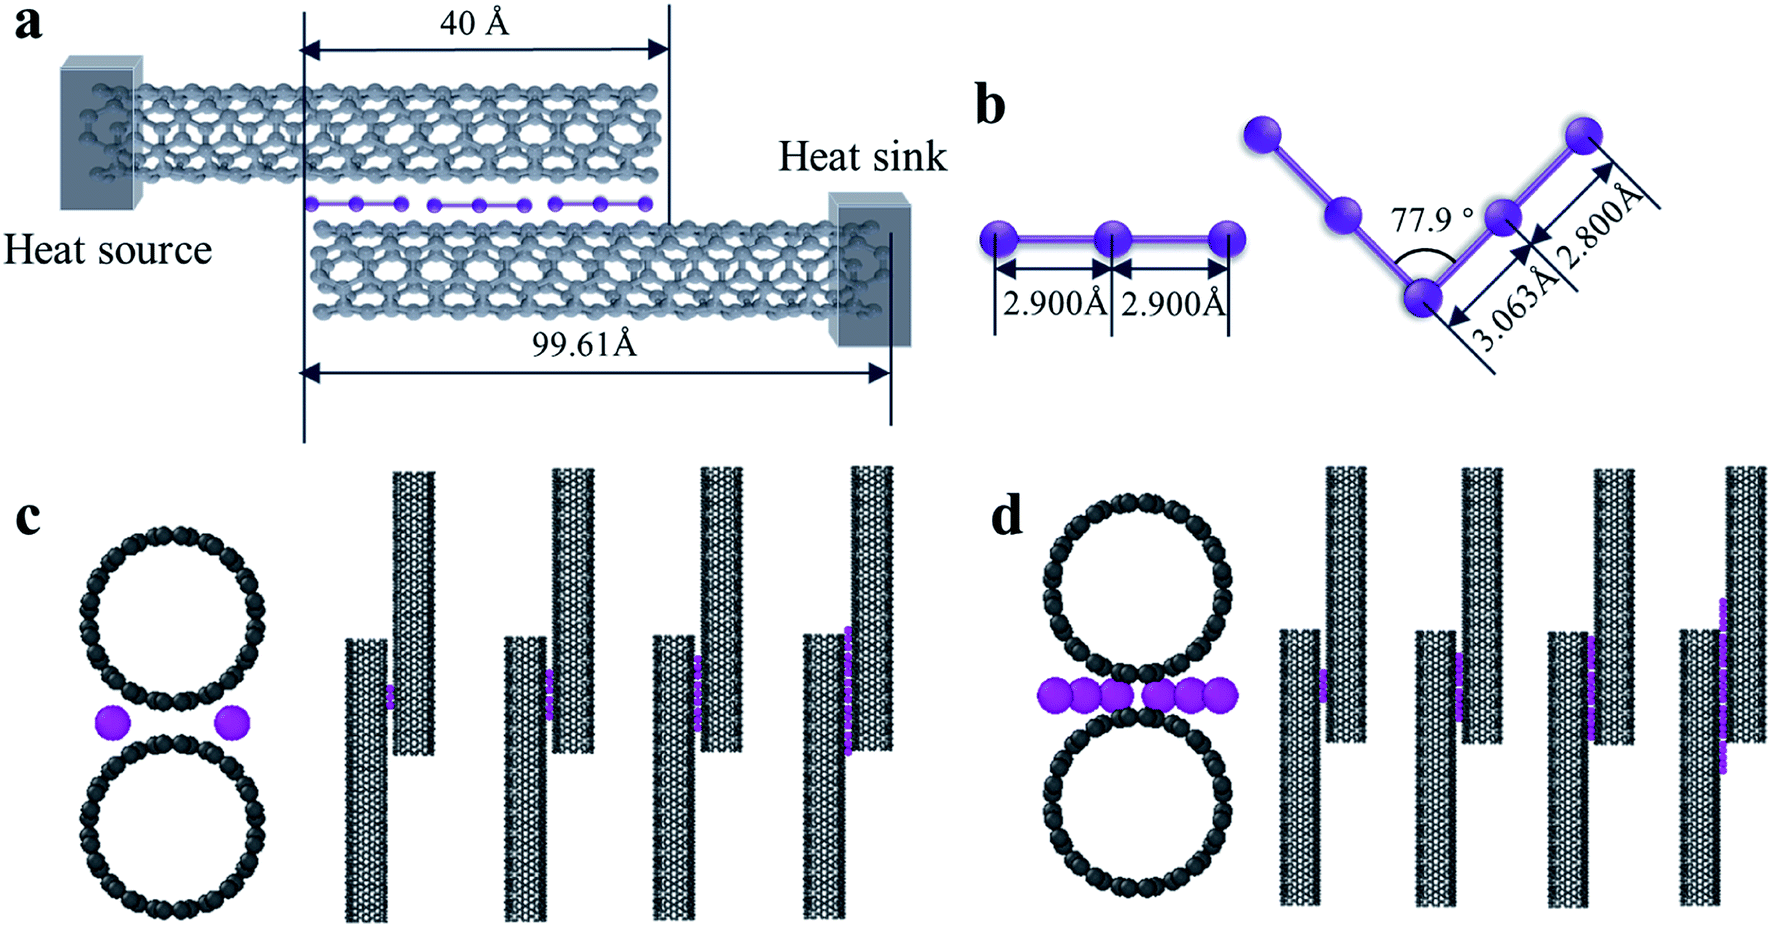 Effect Of The Loading Amount And Arrangement Of Iodine Chains On The Interfacial Thermal Transport Of Carbon Nanotubes A Molecular Dynamics Study Rsc Advances Rsc Publishing Doi 10 1039 D0rae